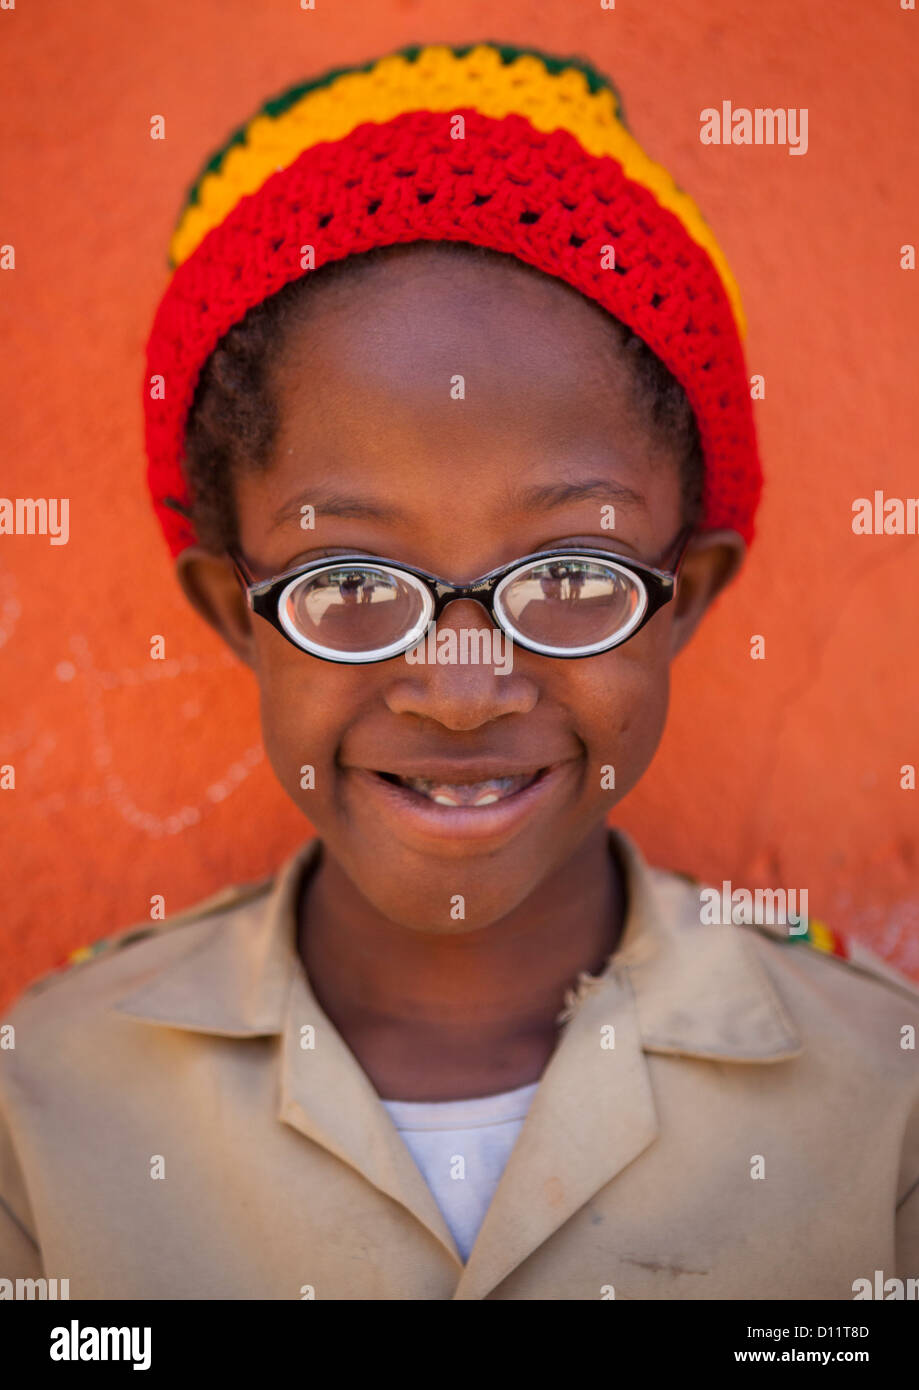 Thick Glasses High Resolution Stock Photography and Images - Alamy